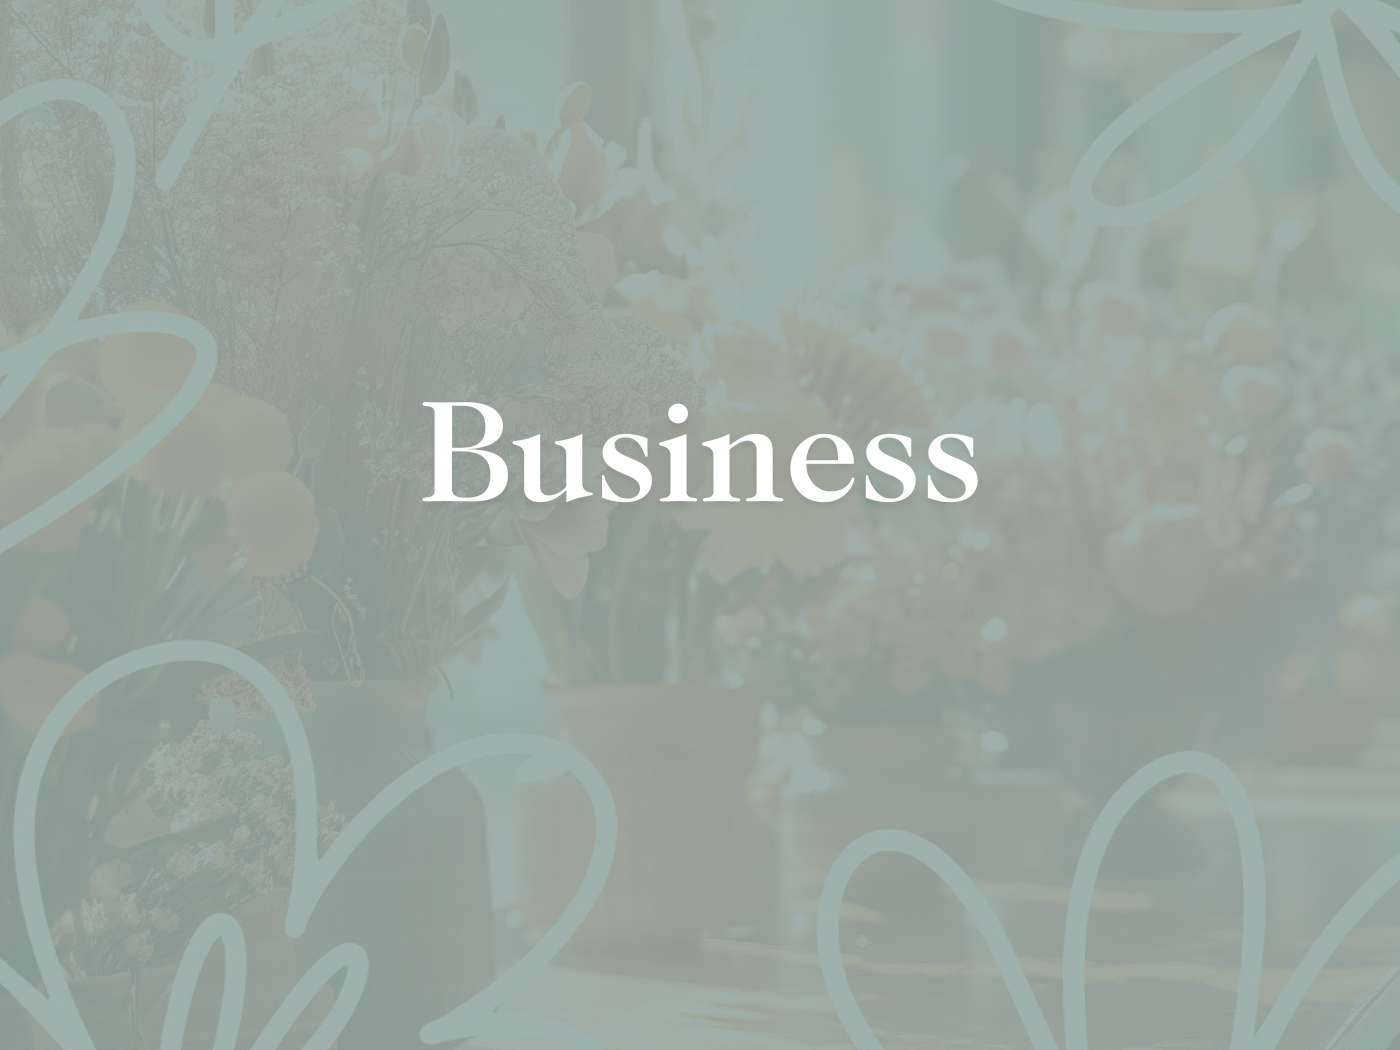 Stylised text 'Business' overlaying a muted backdrop of a floral arrangement, symbolising the curated selection of Business Flowers and Gifts at Fabulous Flowers and Gifts.